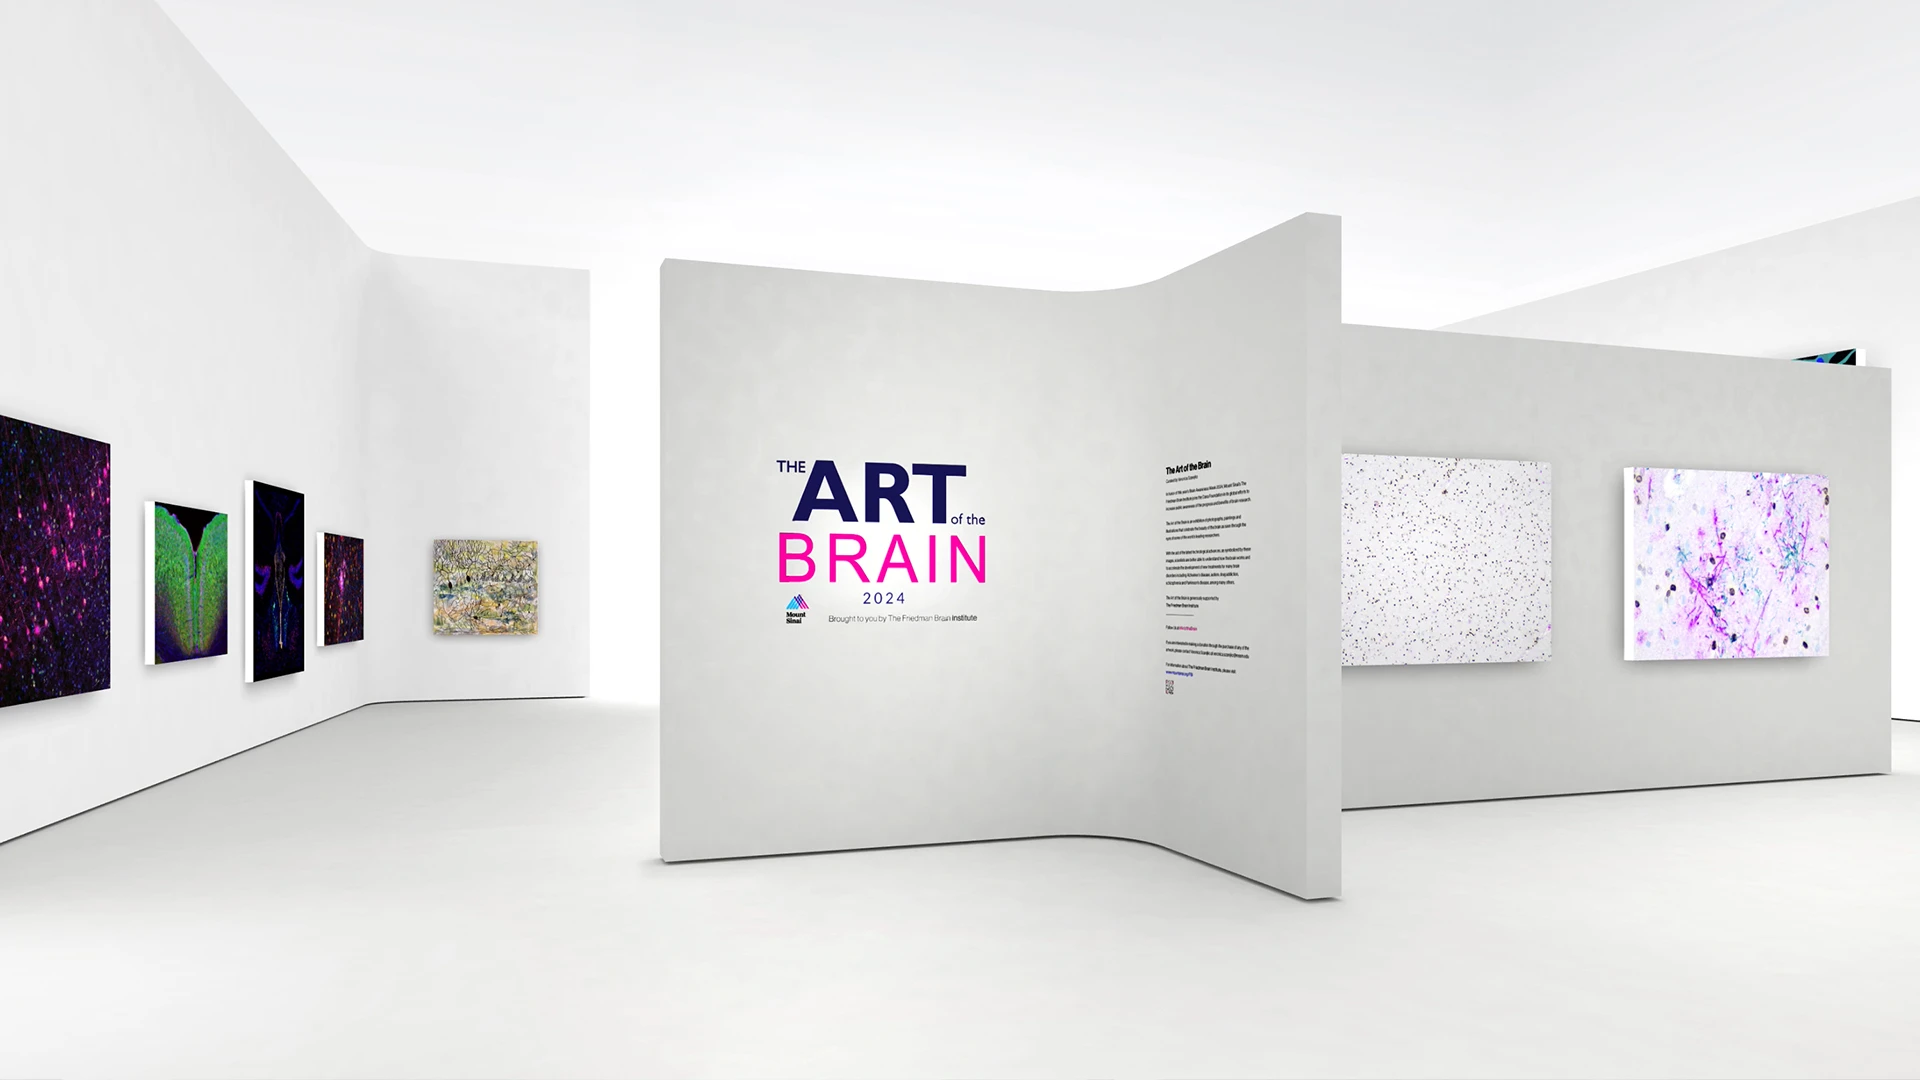 The Art of the Brain is a virtual museum-like exhibit. 